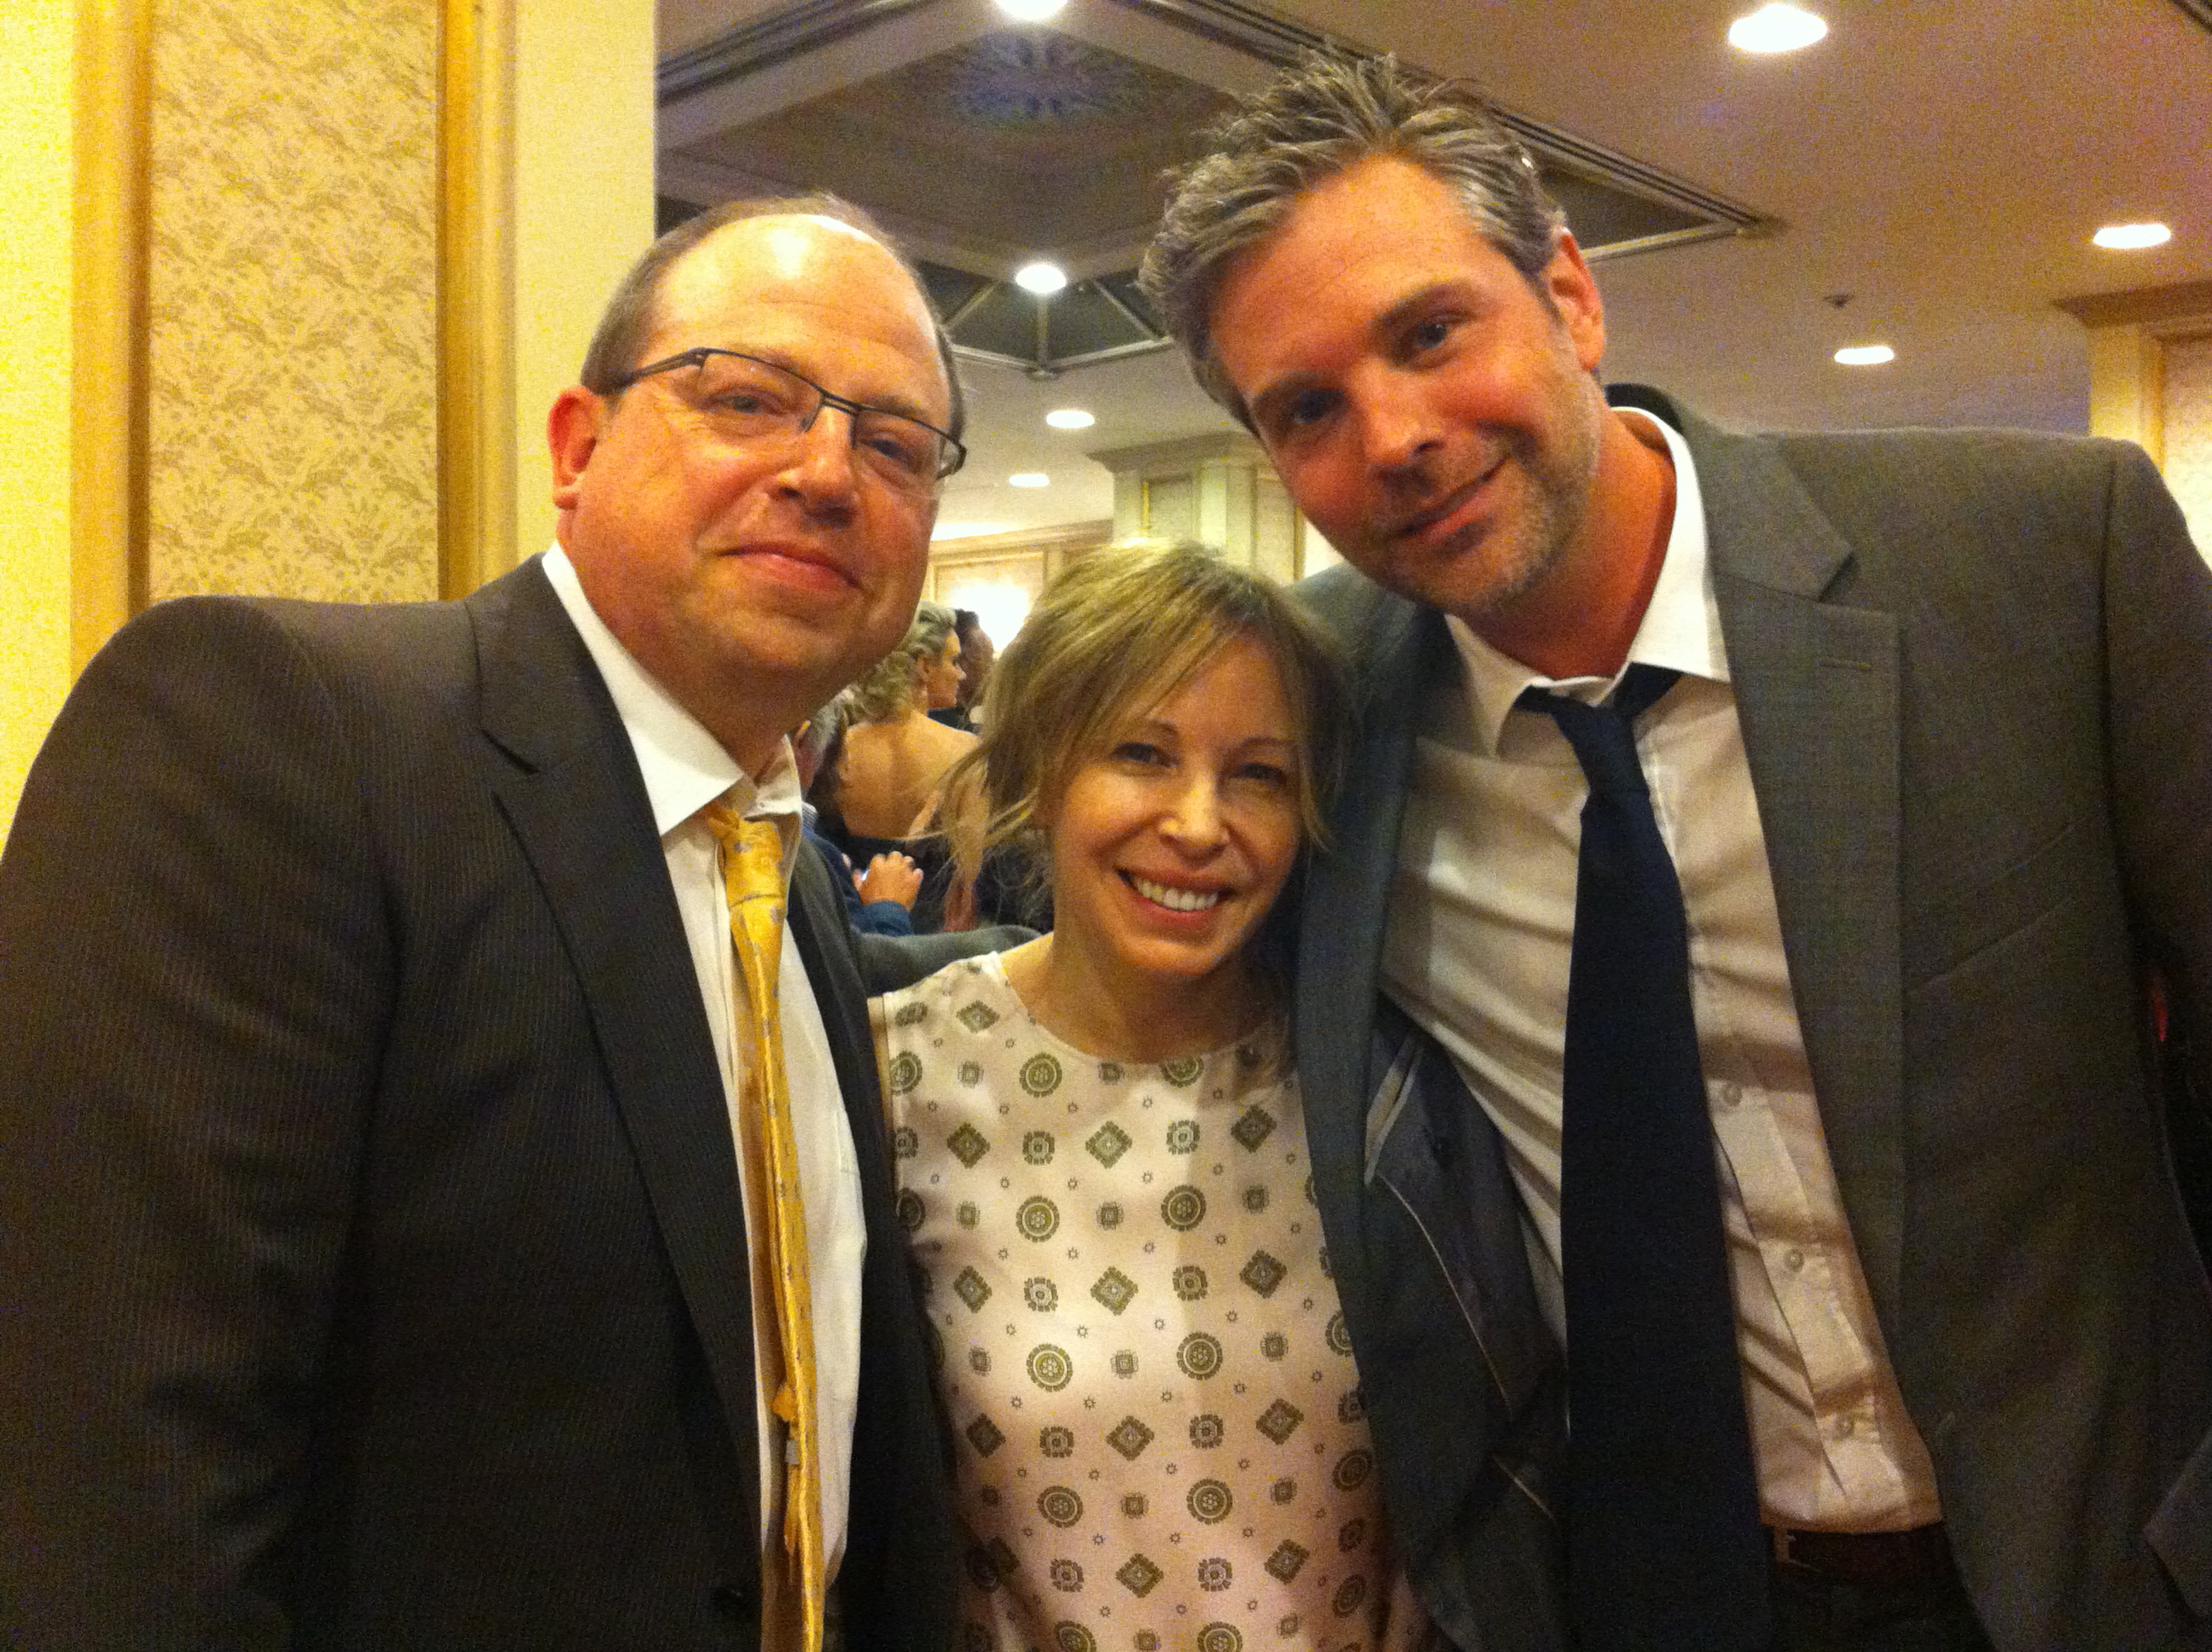 At the 2011 Leo awards, with Brent Butt and Nancy Robertson.